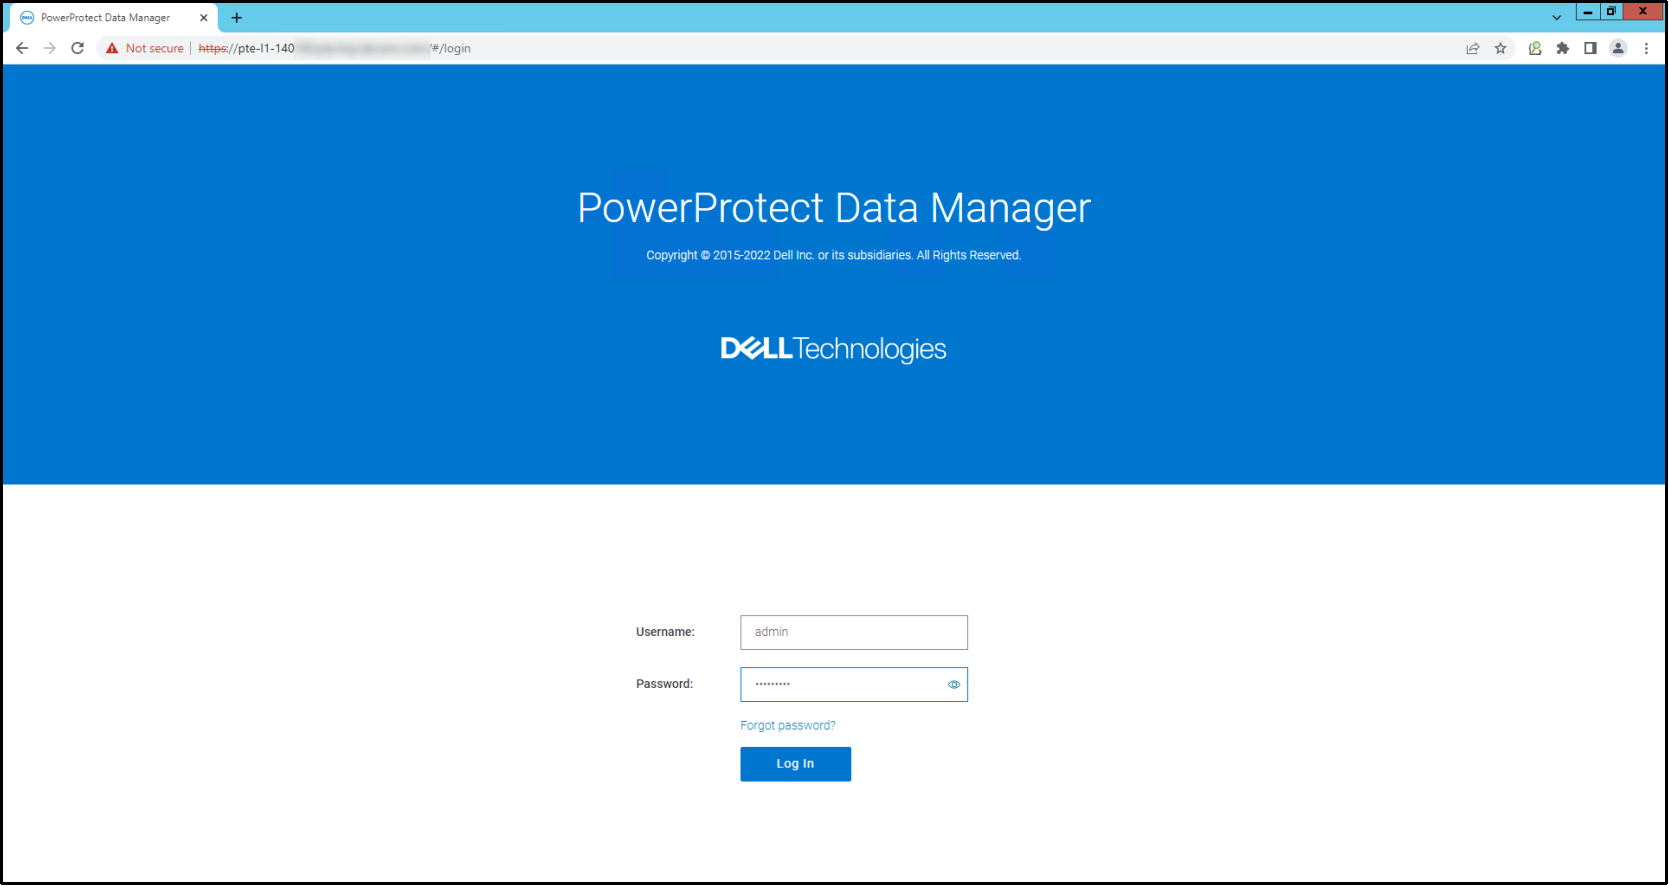 The image depicts the PowerProtect Data Manager Appliance login UI.